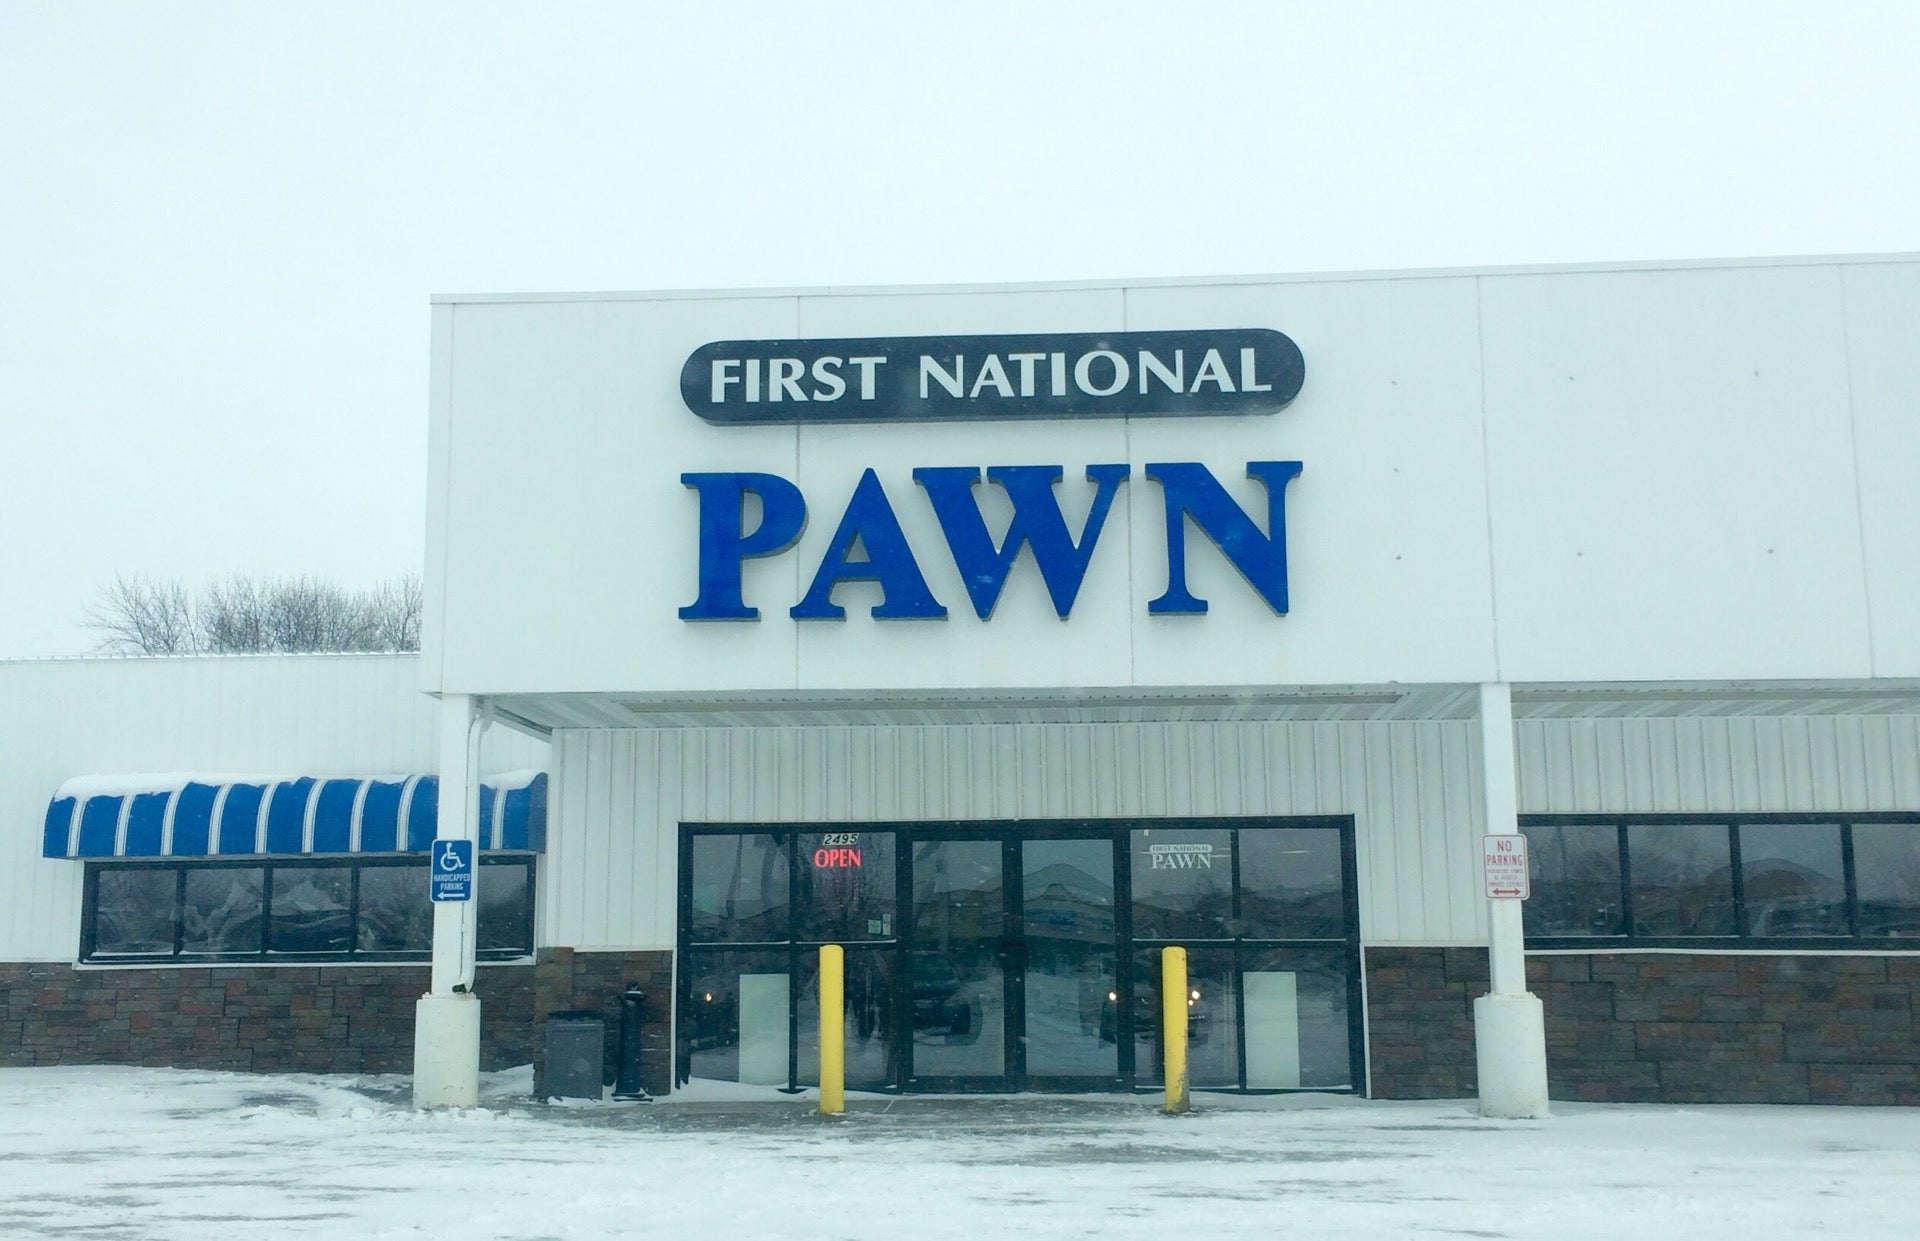 First National Pawn Grand Forks Nd 58201